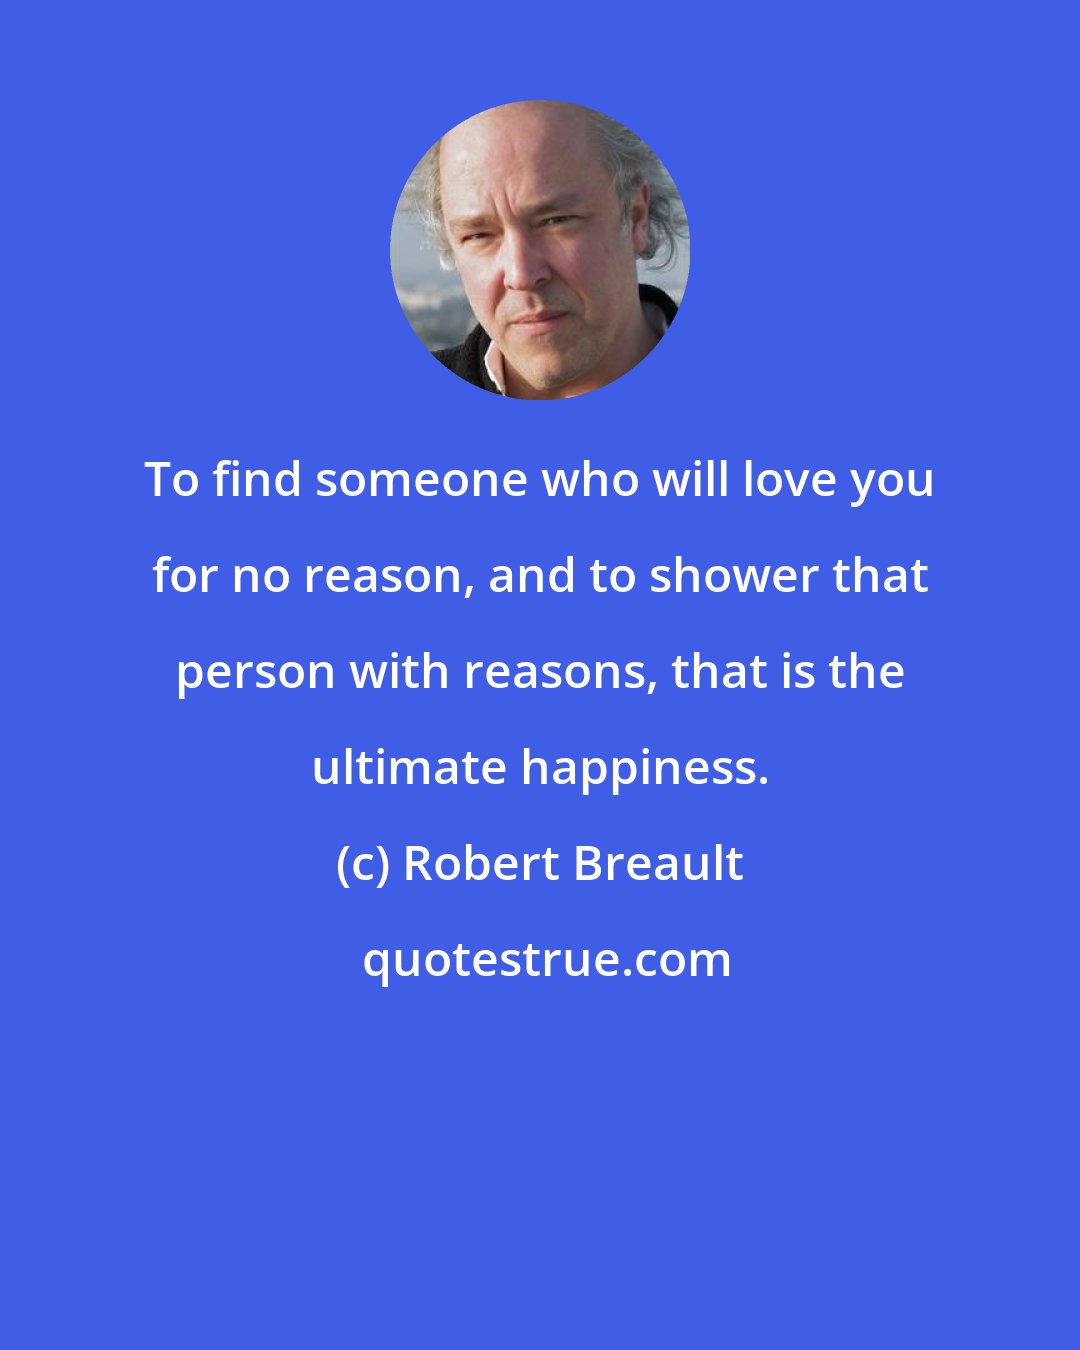 Robert Breault: To find someone who will love you for no reason, and to shower that person with reasons, that is the ultimate happiness.